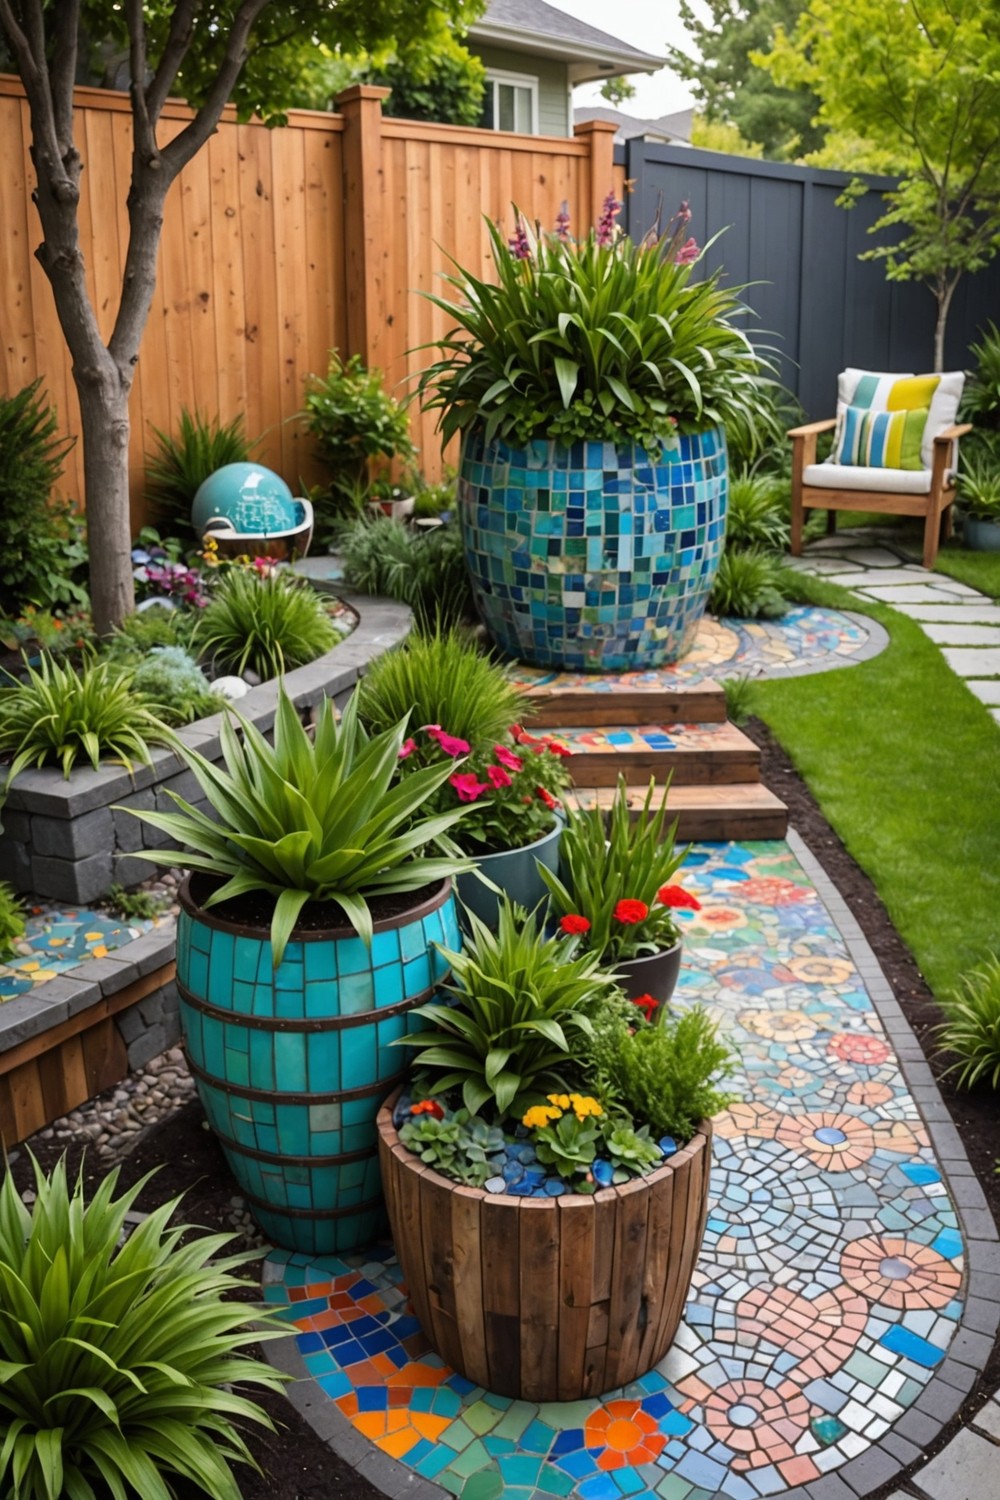 Incorporating Recycled Materials into the Front Yard Landscape